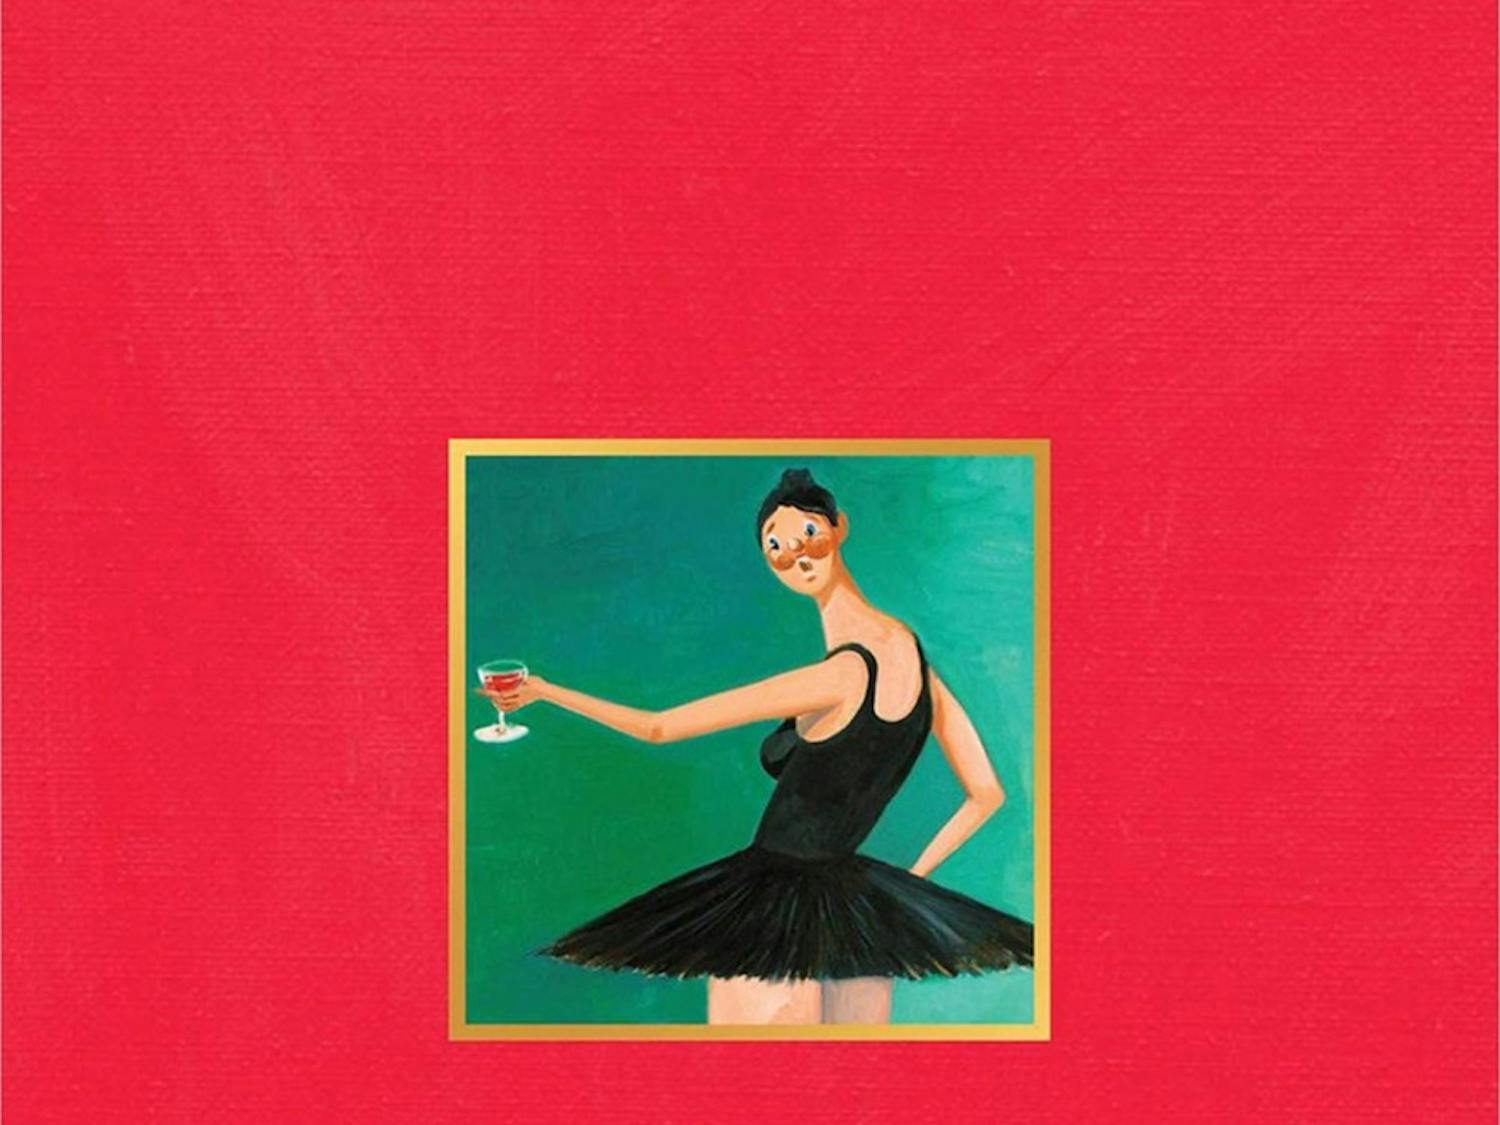 kanye-west-my-beautiful-dark-twisted-fantasy-review-01